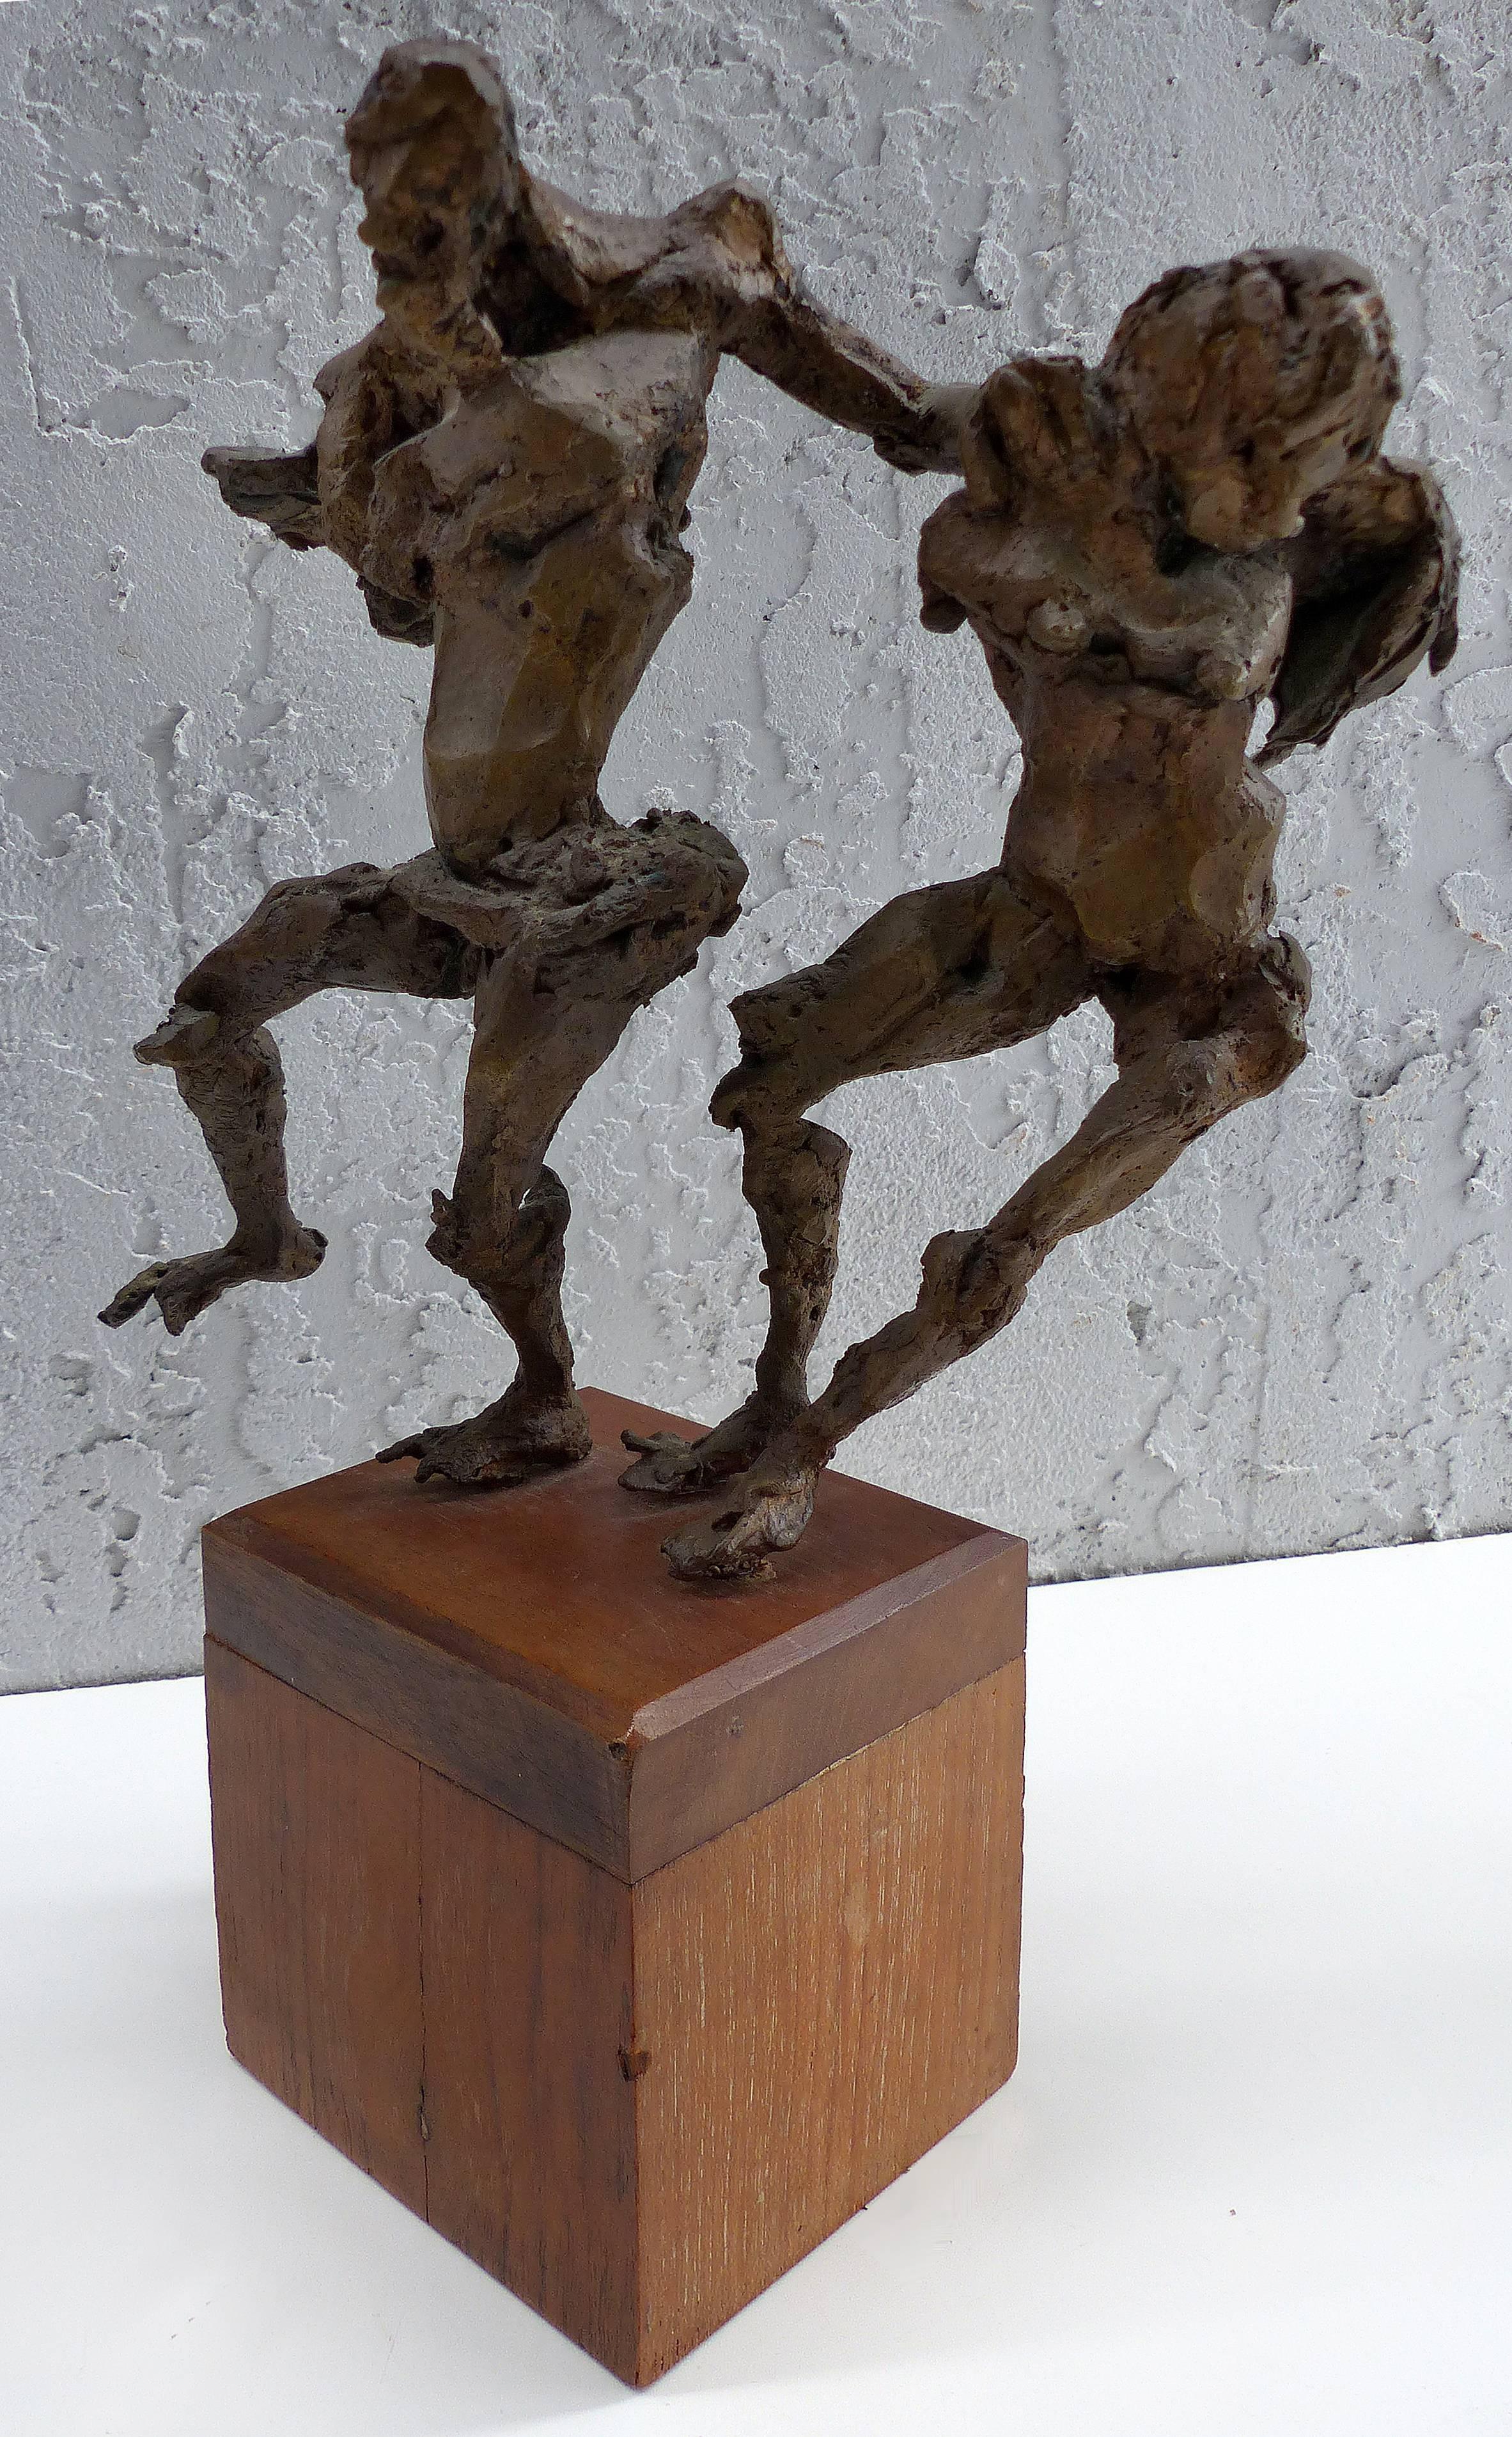 Linda Goodman Brutalist Bronze Figurative Sculpture

Offered for sale is a Brutalist bronze sculpture by the American artist Linda Goodman  (1910-2004). This Mid-Century Modern bronze sculpture depicts two frolicking figures supported upon a wooden